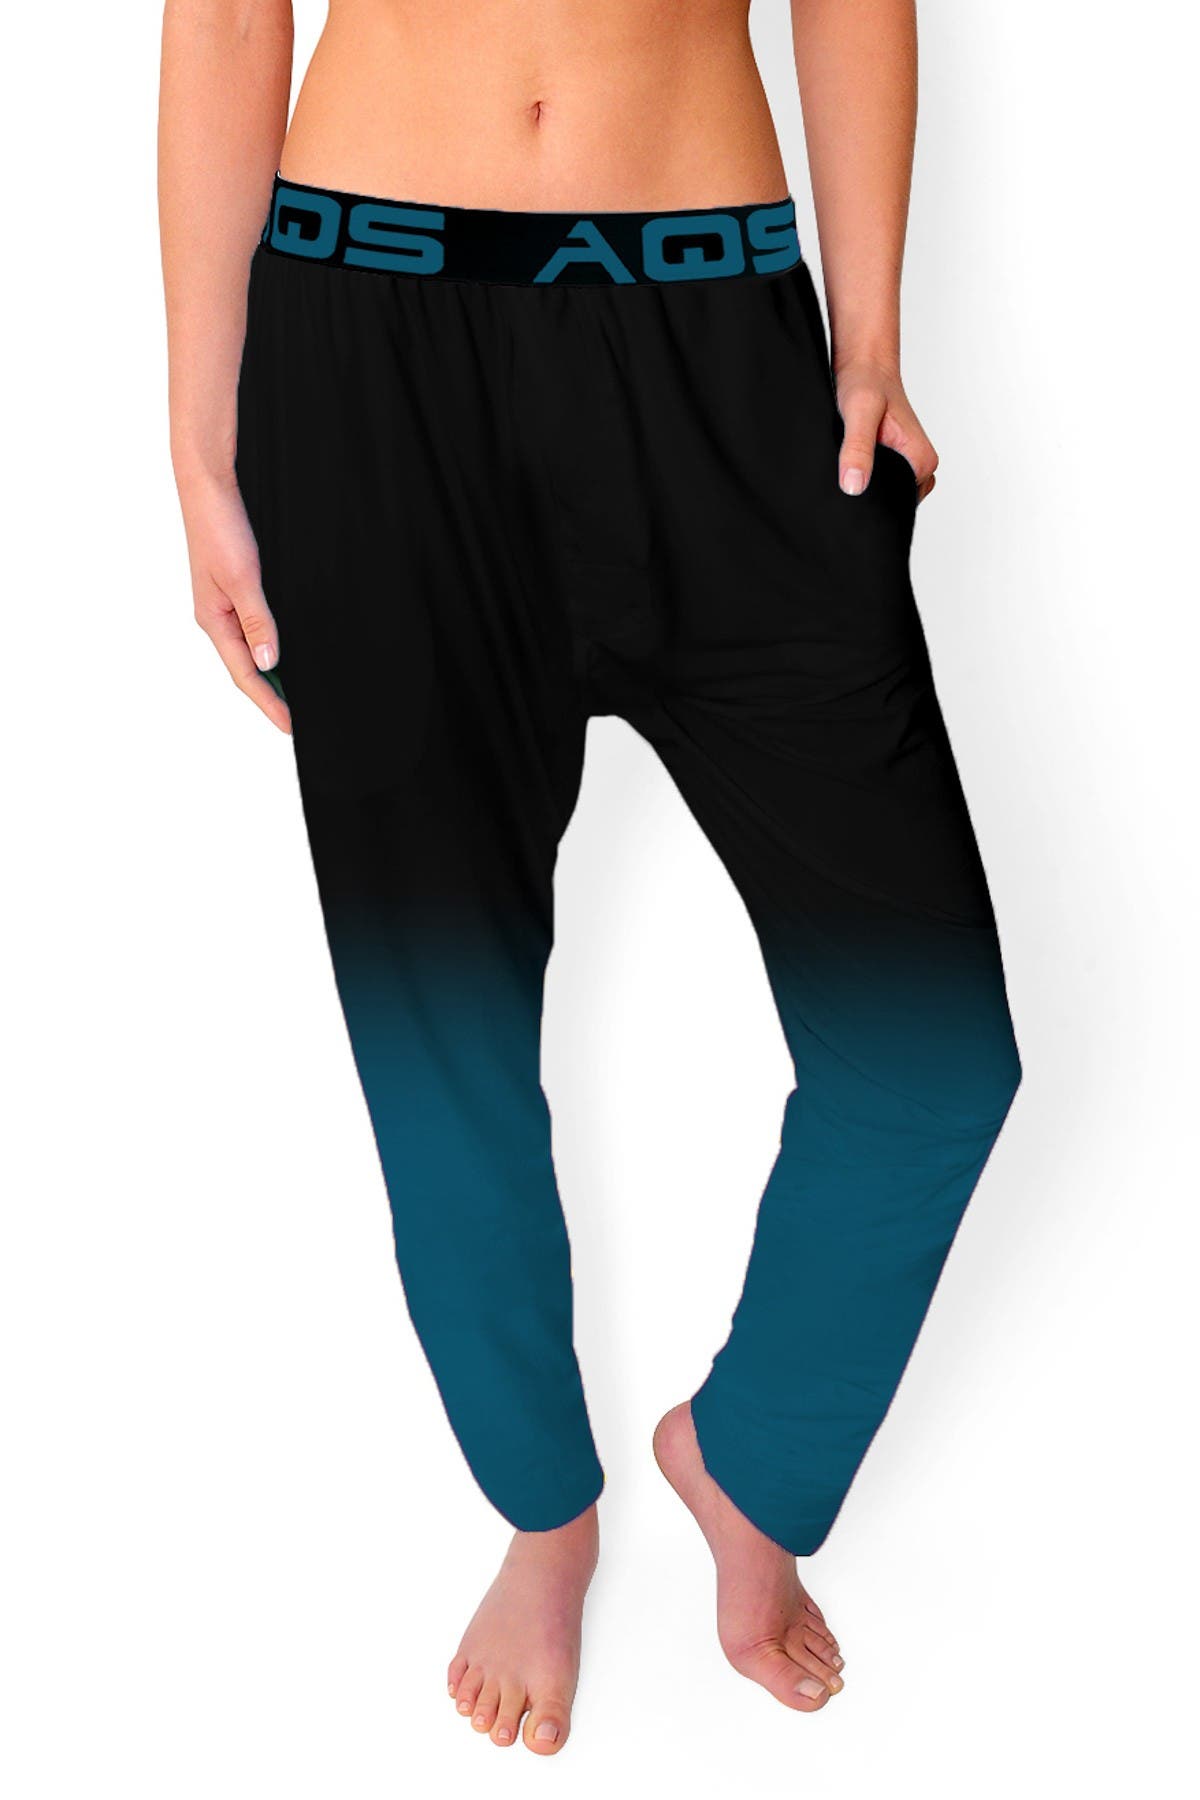 Aqs Ombre Lounge Pants In Black/teal Ombre